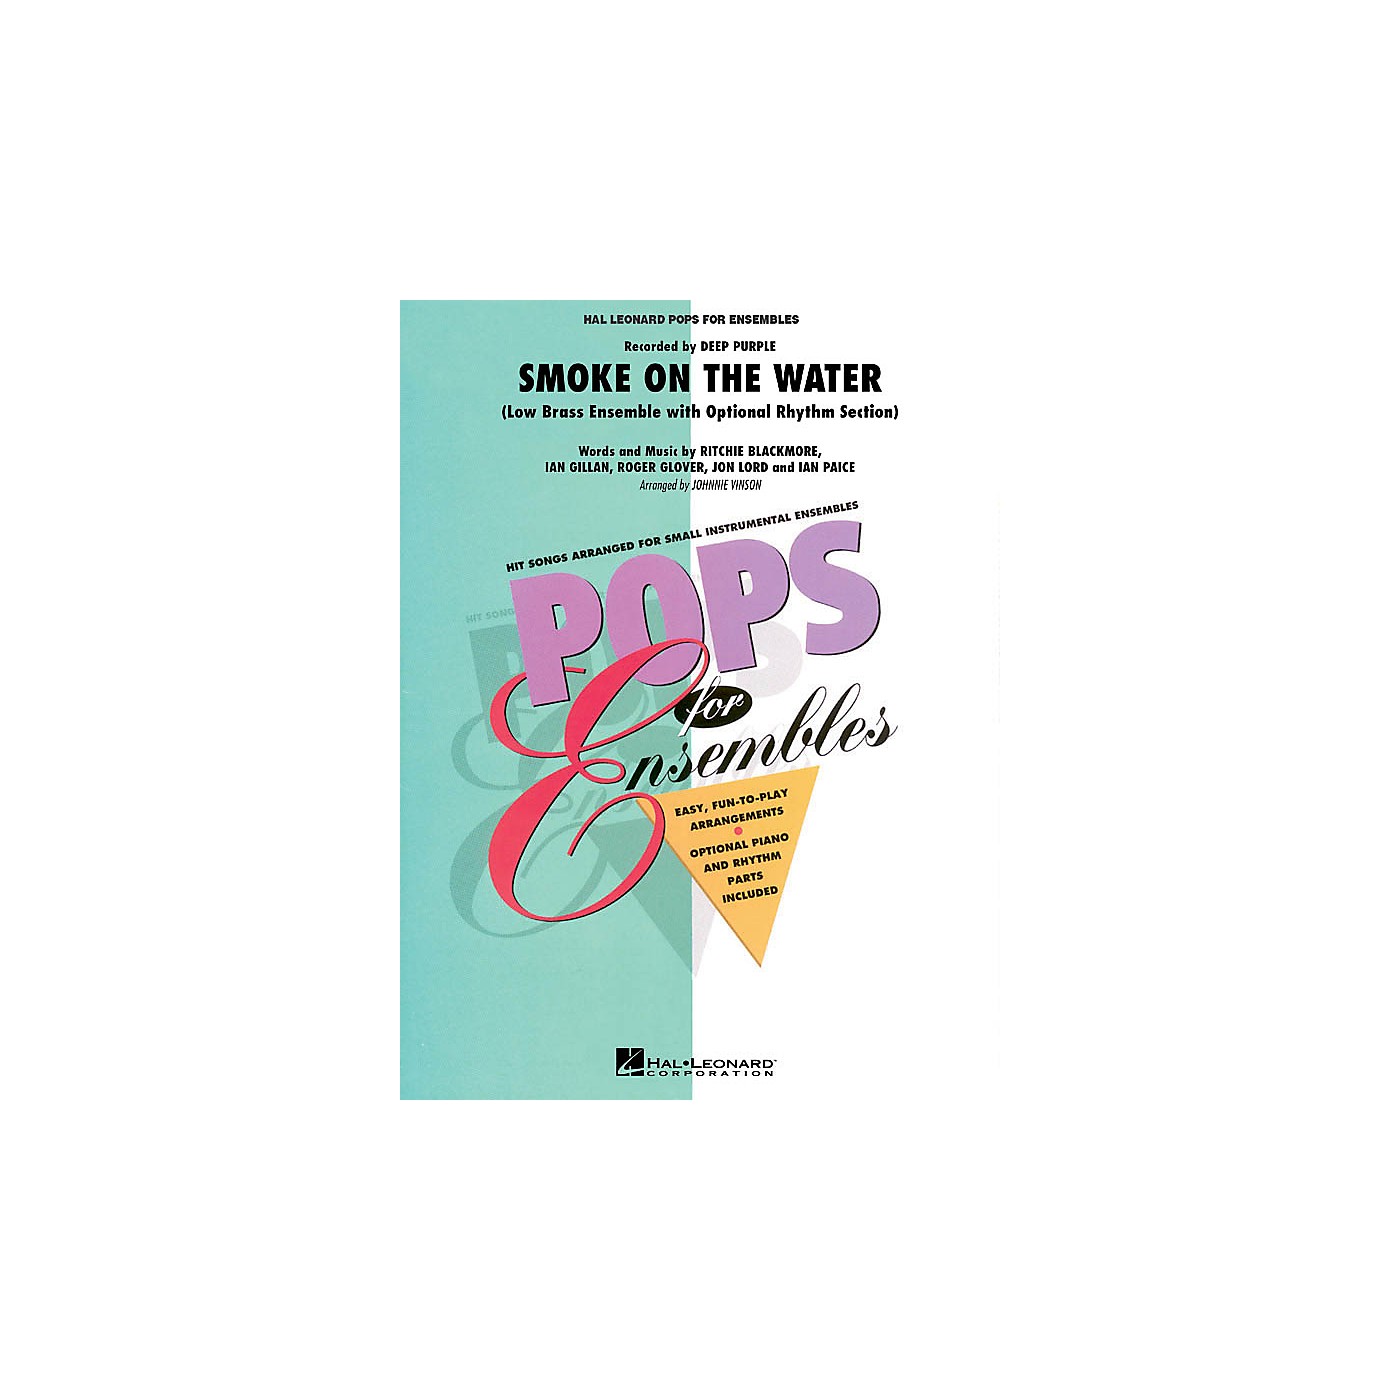 Hal Leonard Smoke on the Water (Low Brass Ensemble (opt. rhythm section)) Concert Band Level 2.5 by Johnnie Vinson thumbnail